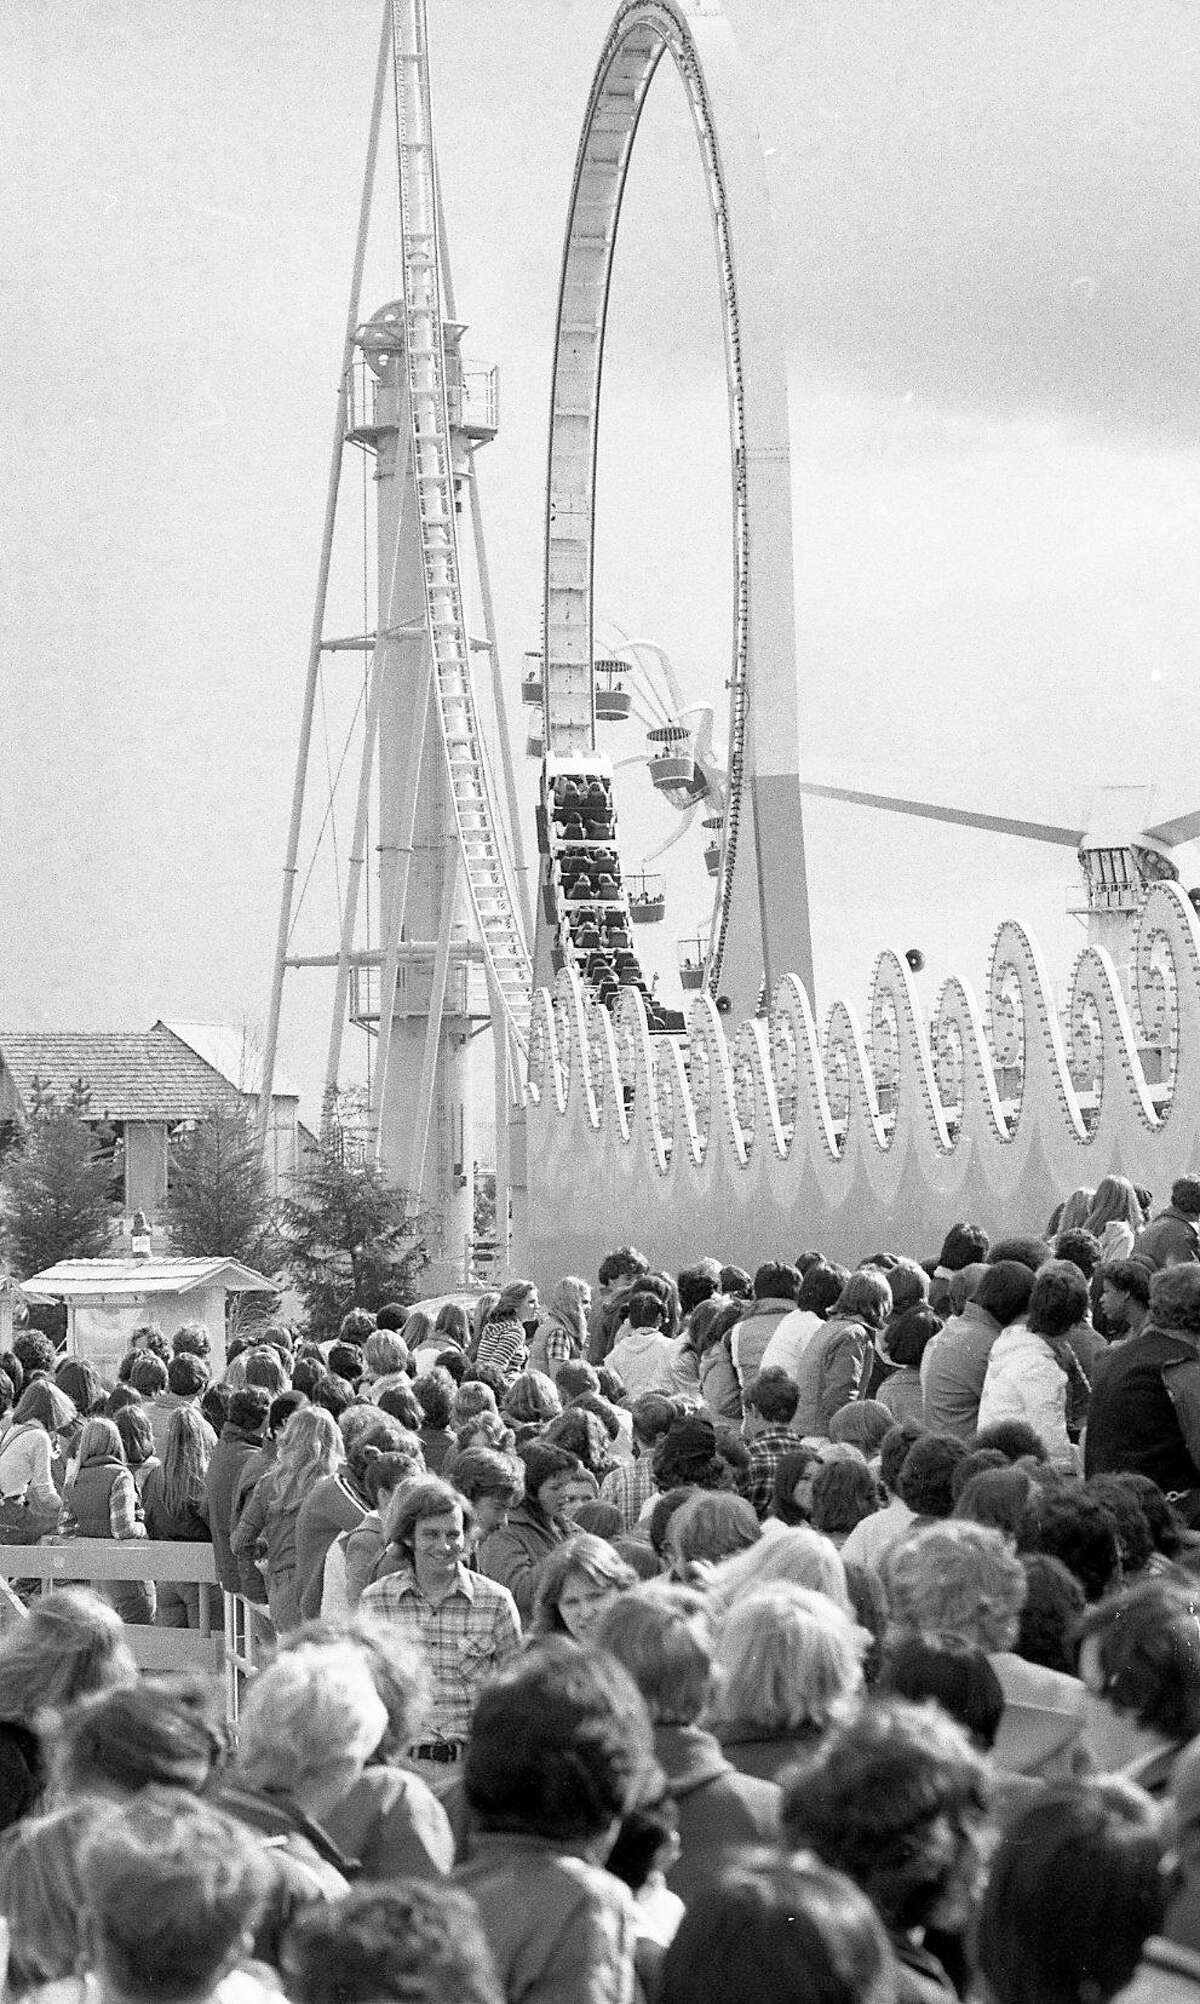 March 14, 1978: Crowds line up to ride the Tidal Wave on Opening Day at Marriott’s Great America in Santa Clara.